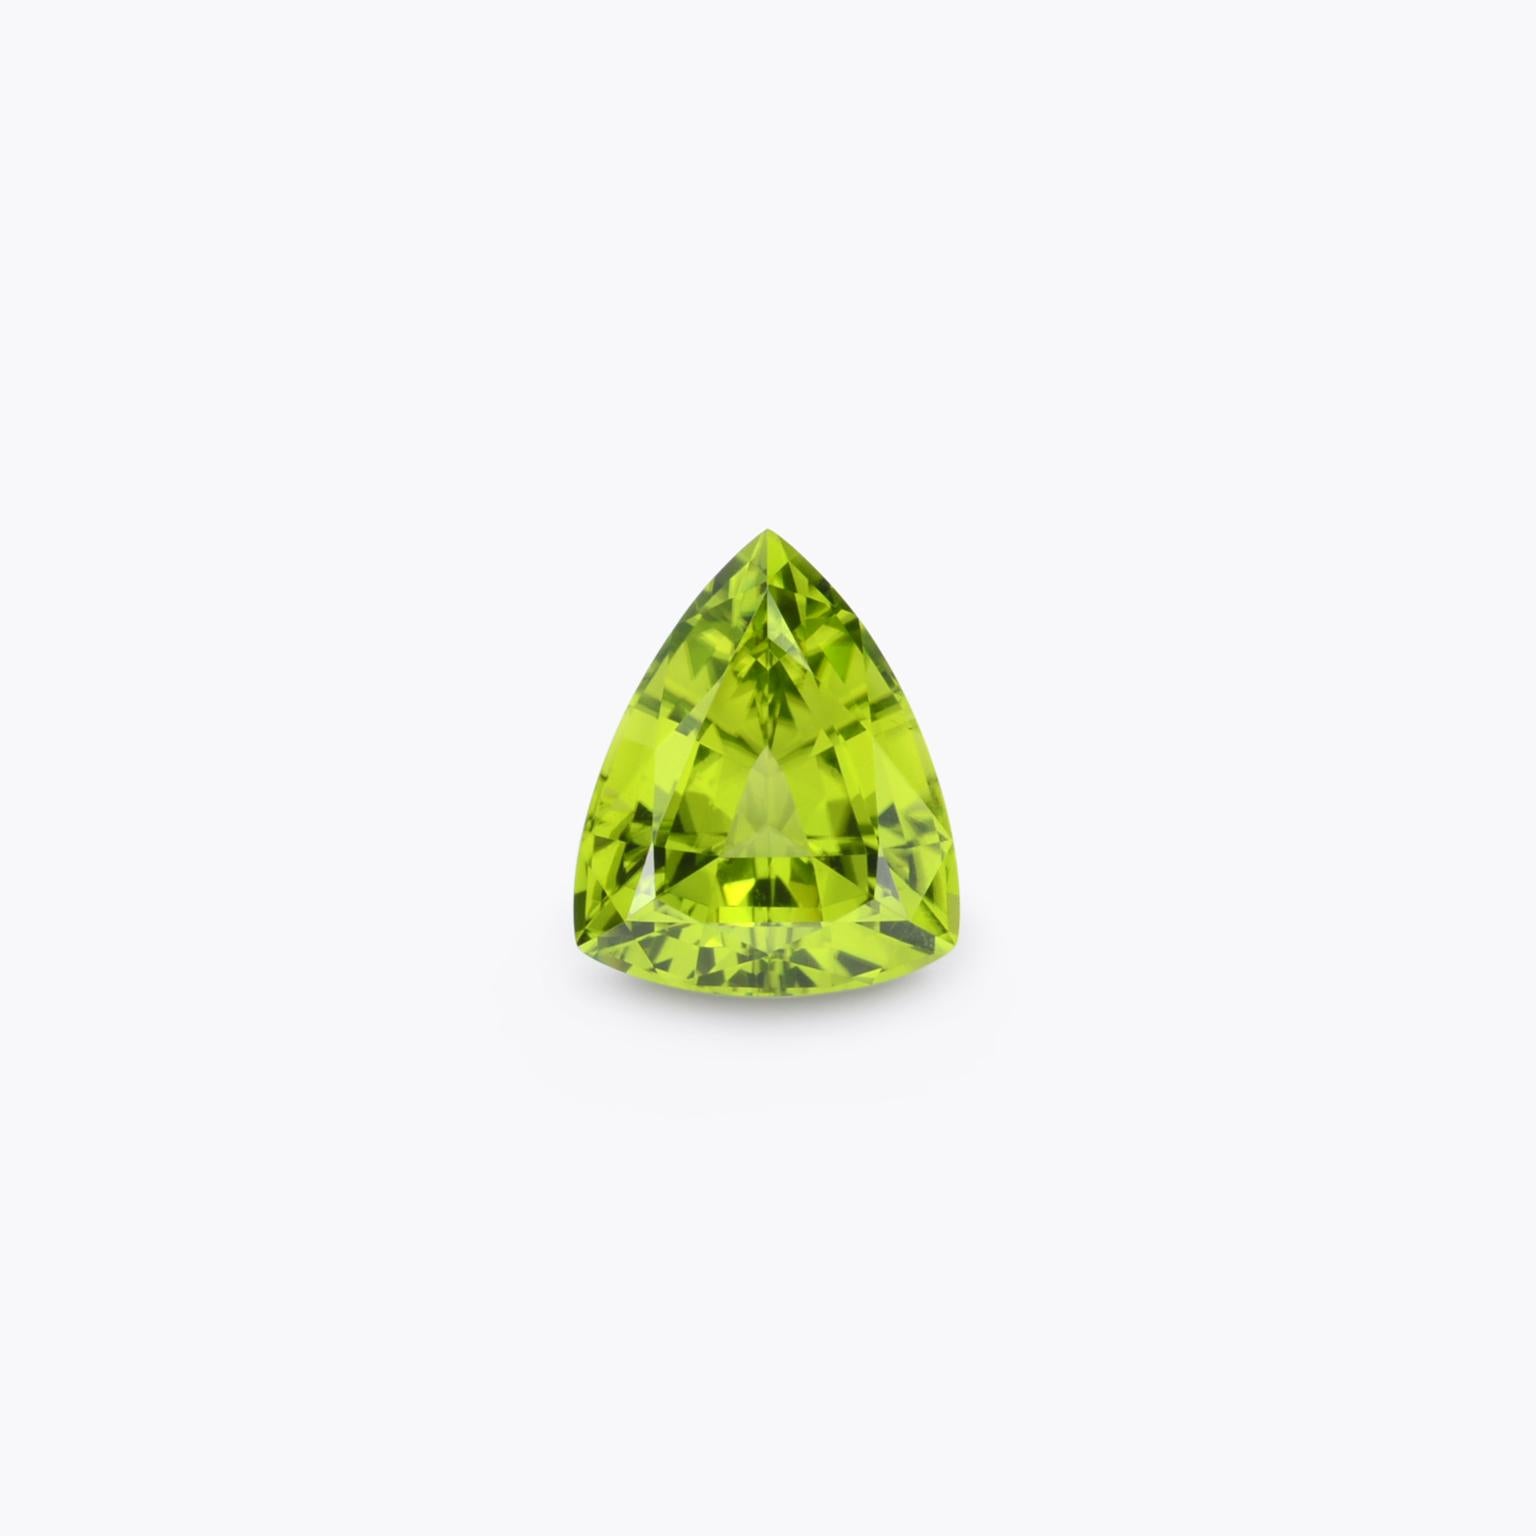 Unique 5.51 carat Peridot Shield gem, offered loose to a stone lover.
Peridot dimensions: 12.70mm x 10.50mm x 6.80mm.
Returns are accepted and paid by us within 7 days of delivery.
We offer supreme custom jewelry work upon request. Please contact us